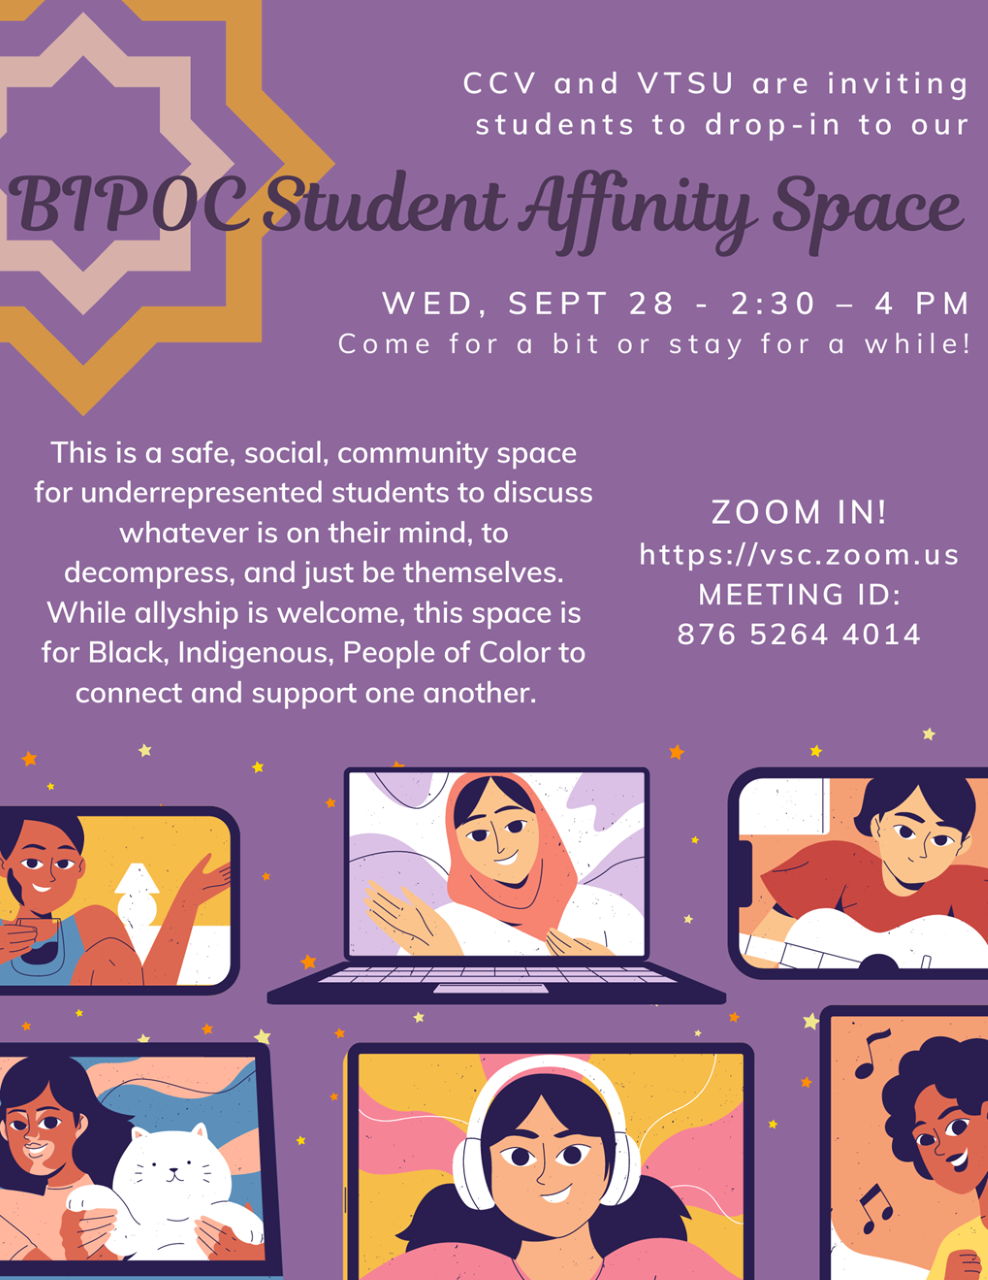 A space for BIPOC students